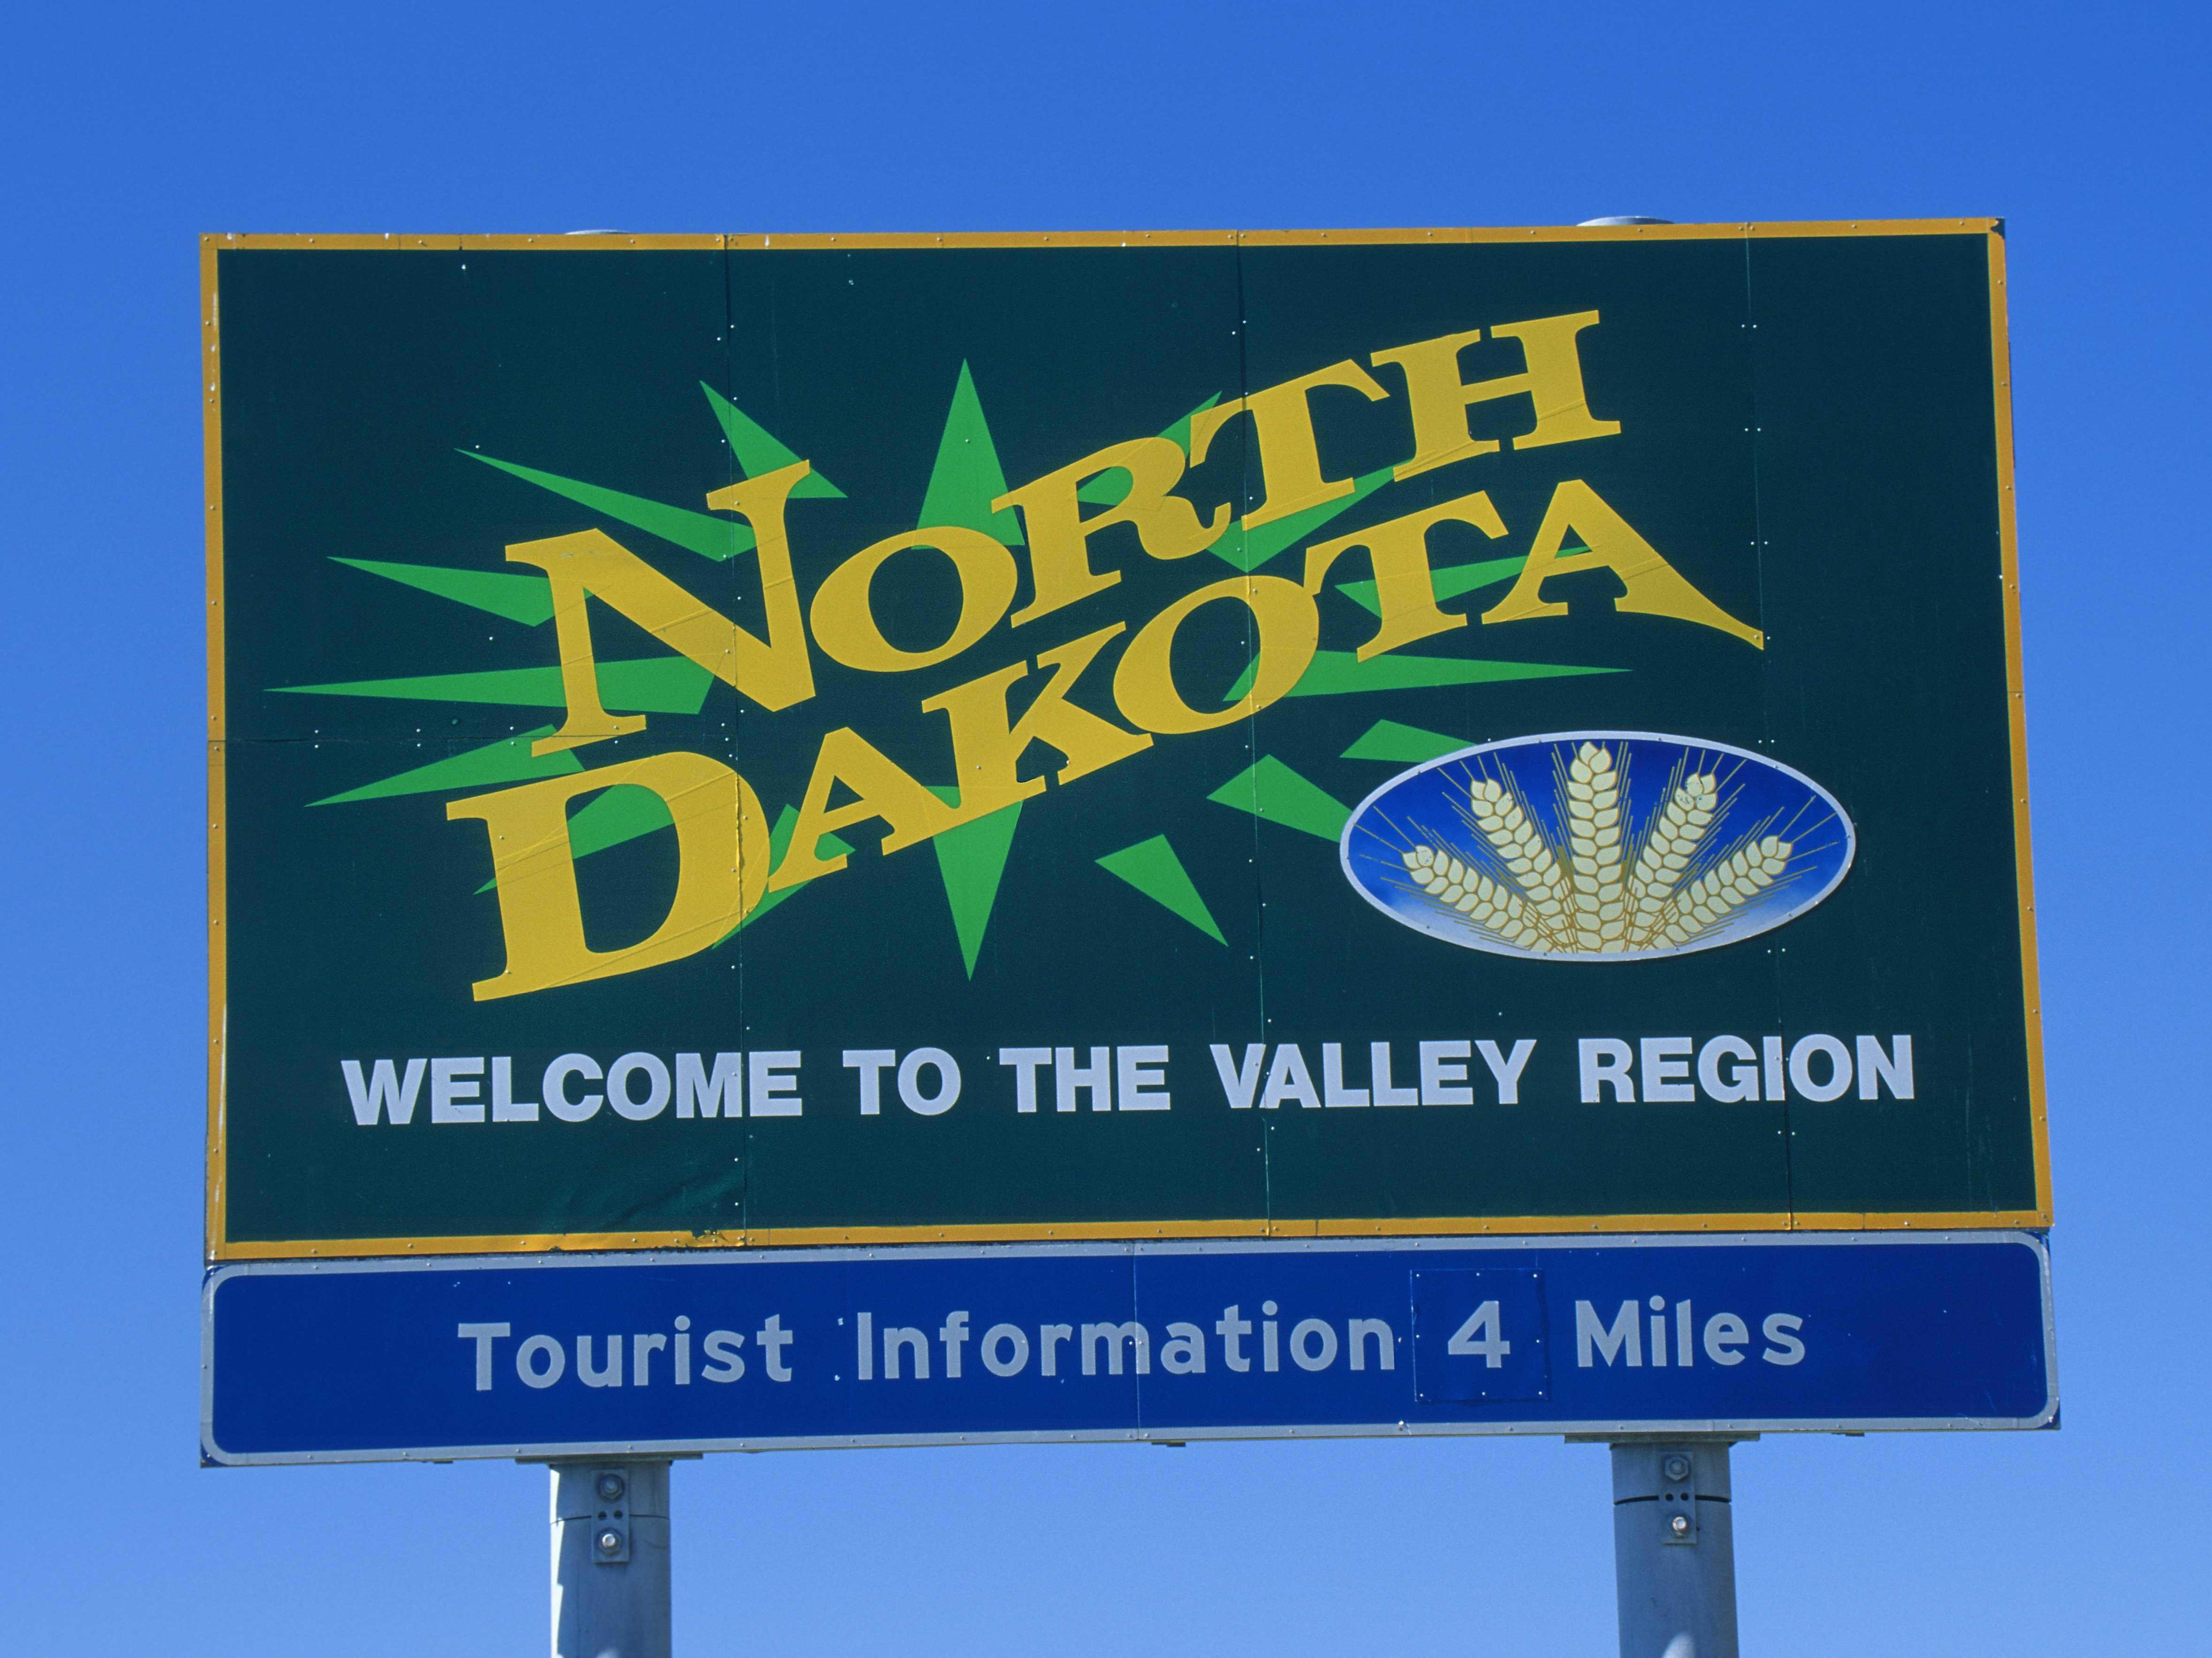 Green sign with text: North Dakota: Welcome to the Valley Region / Tourist Information: 4 Miles